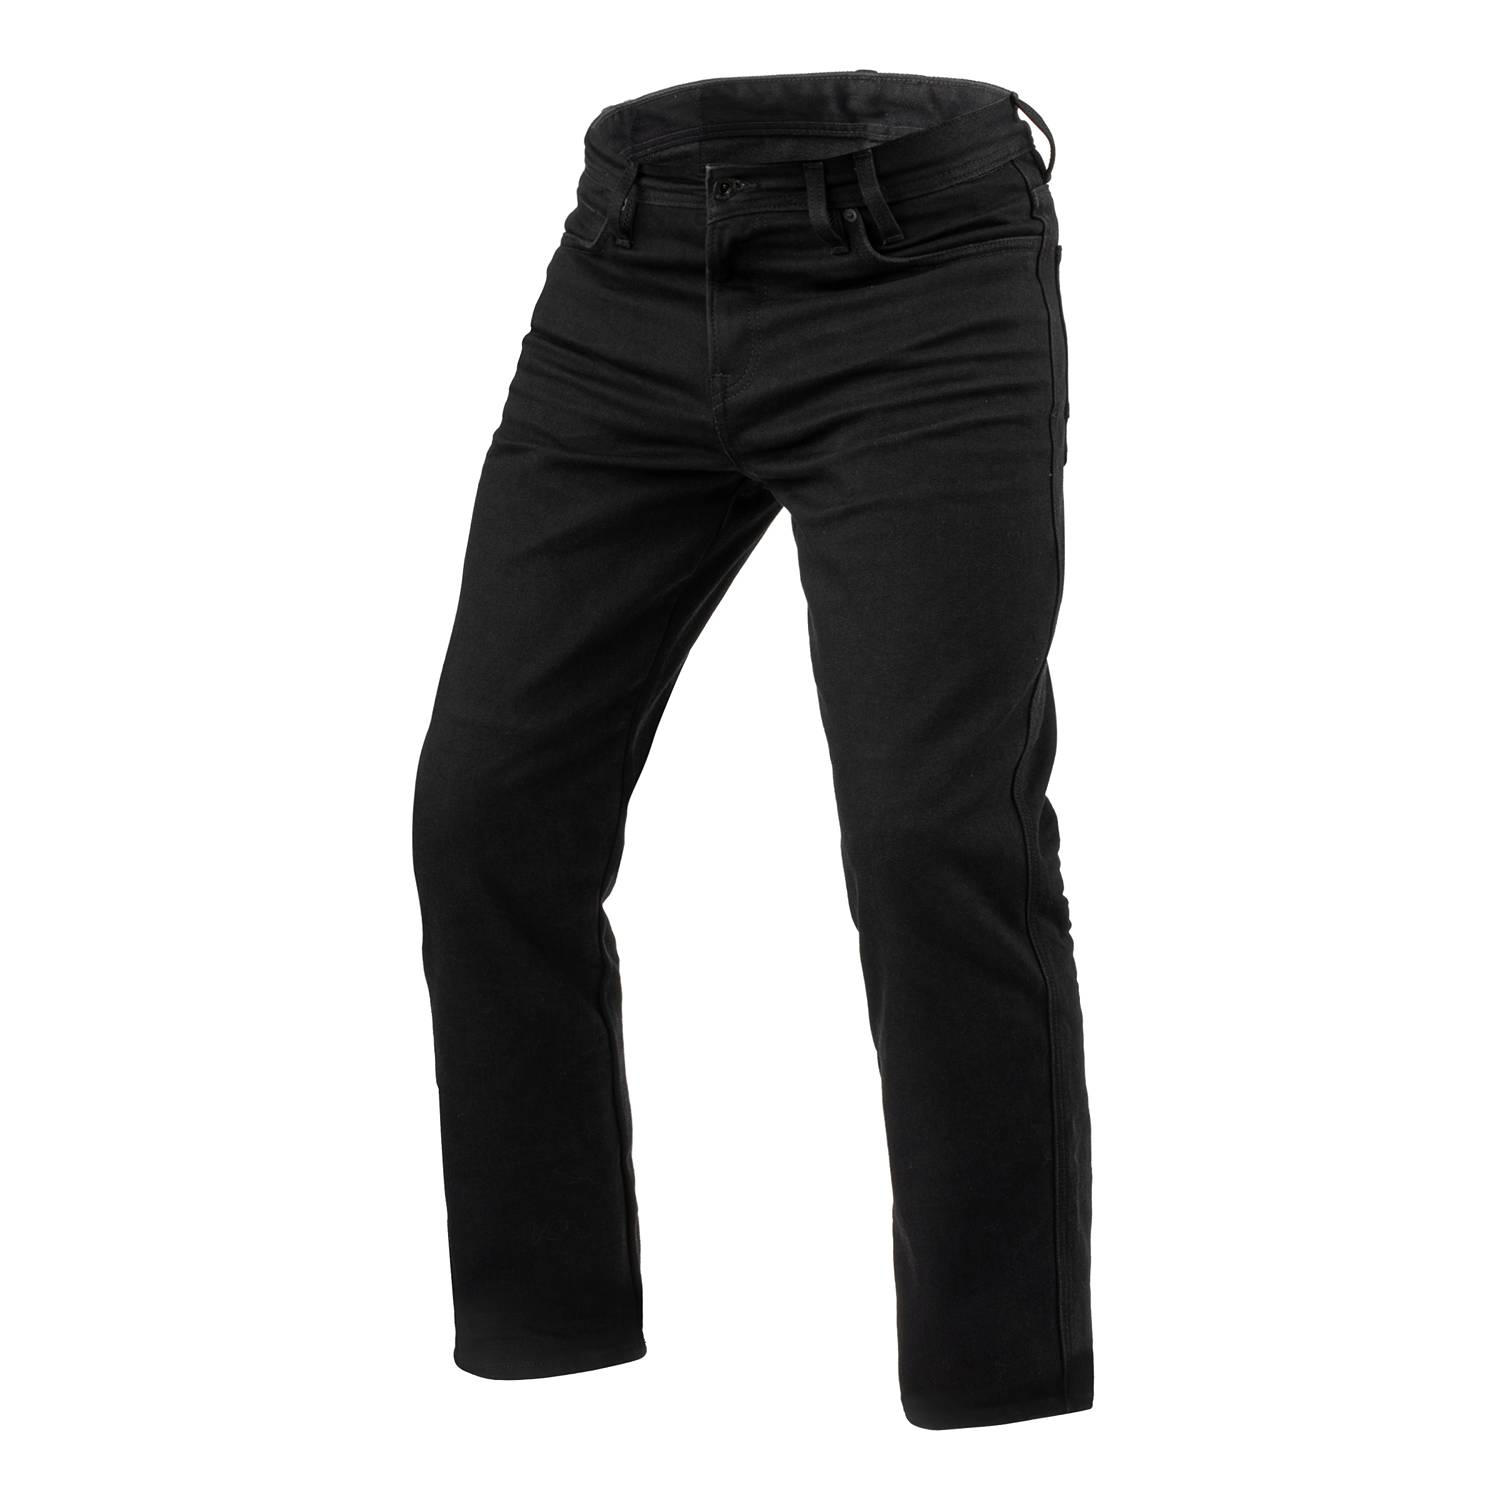 Image of EU REV'IT! Jeans Lombard 3 RF Black L36 Motorcycle Jeans Taille L36/W33